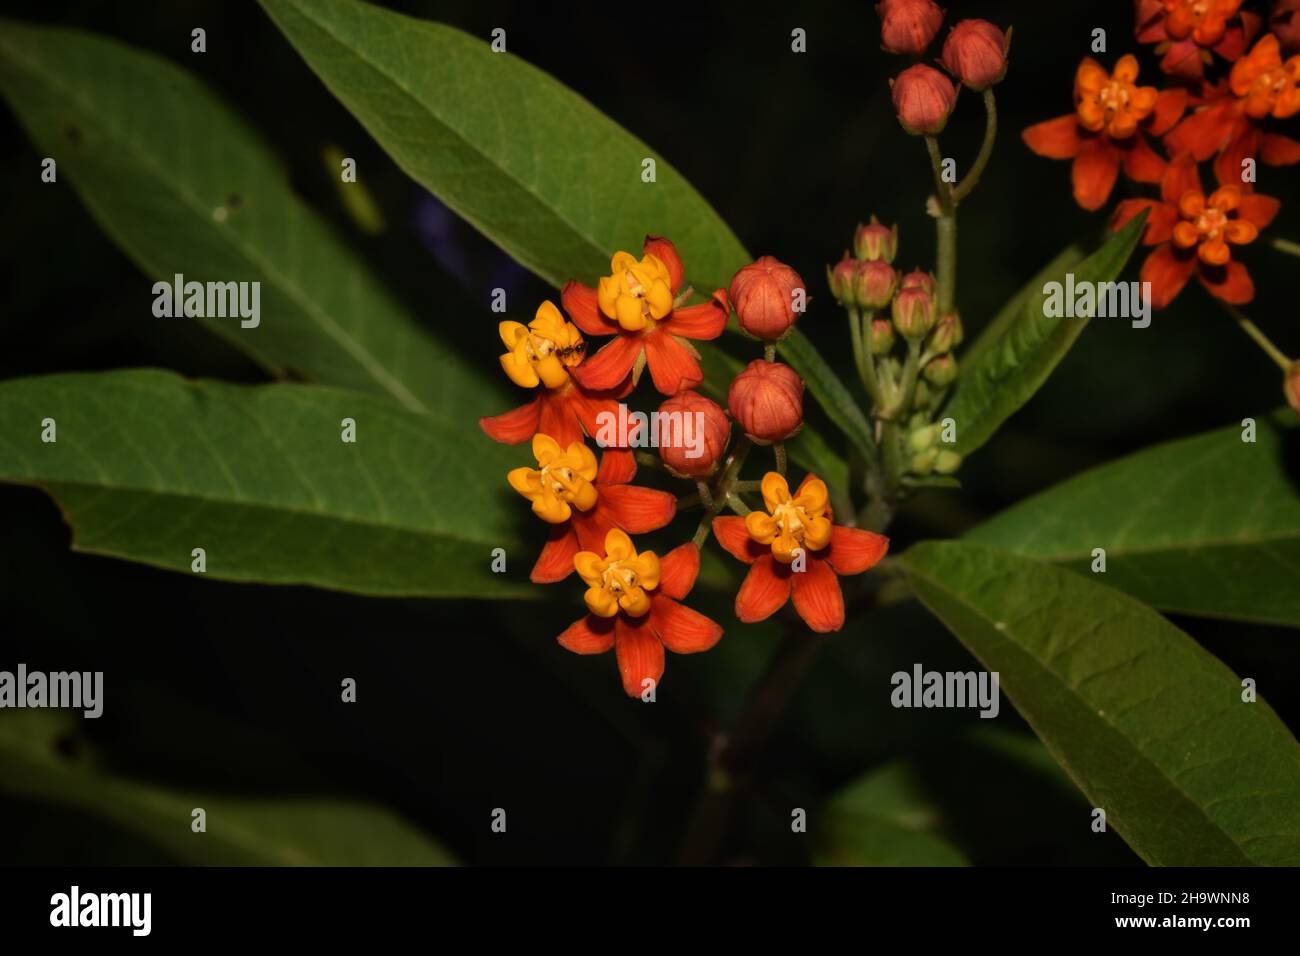 Milkweed flower scientifically known as Asclepias curassavica in a garden in Trinidad. Stock Photo